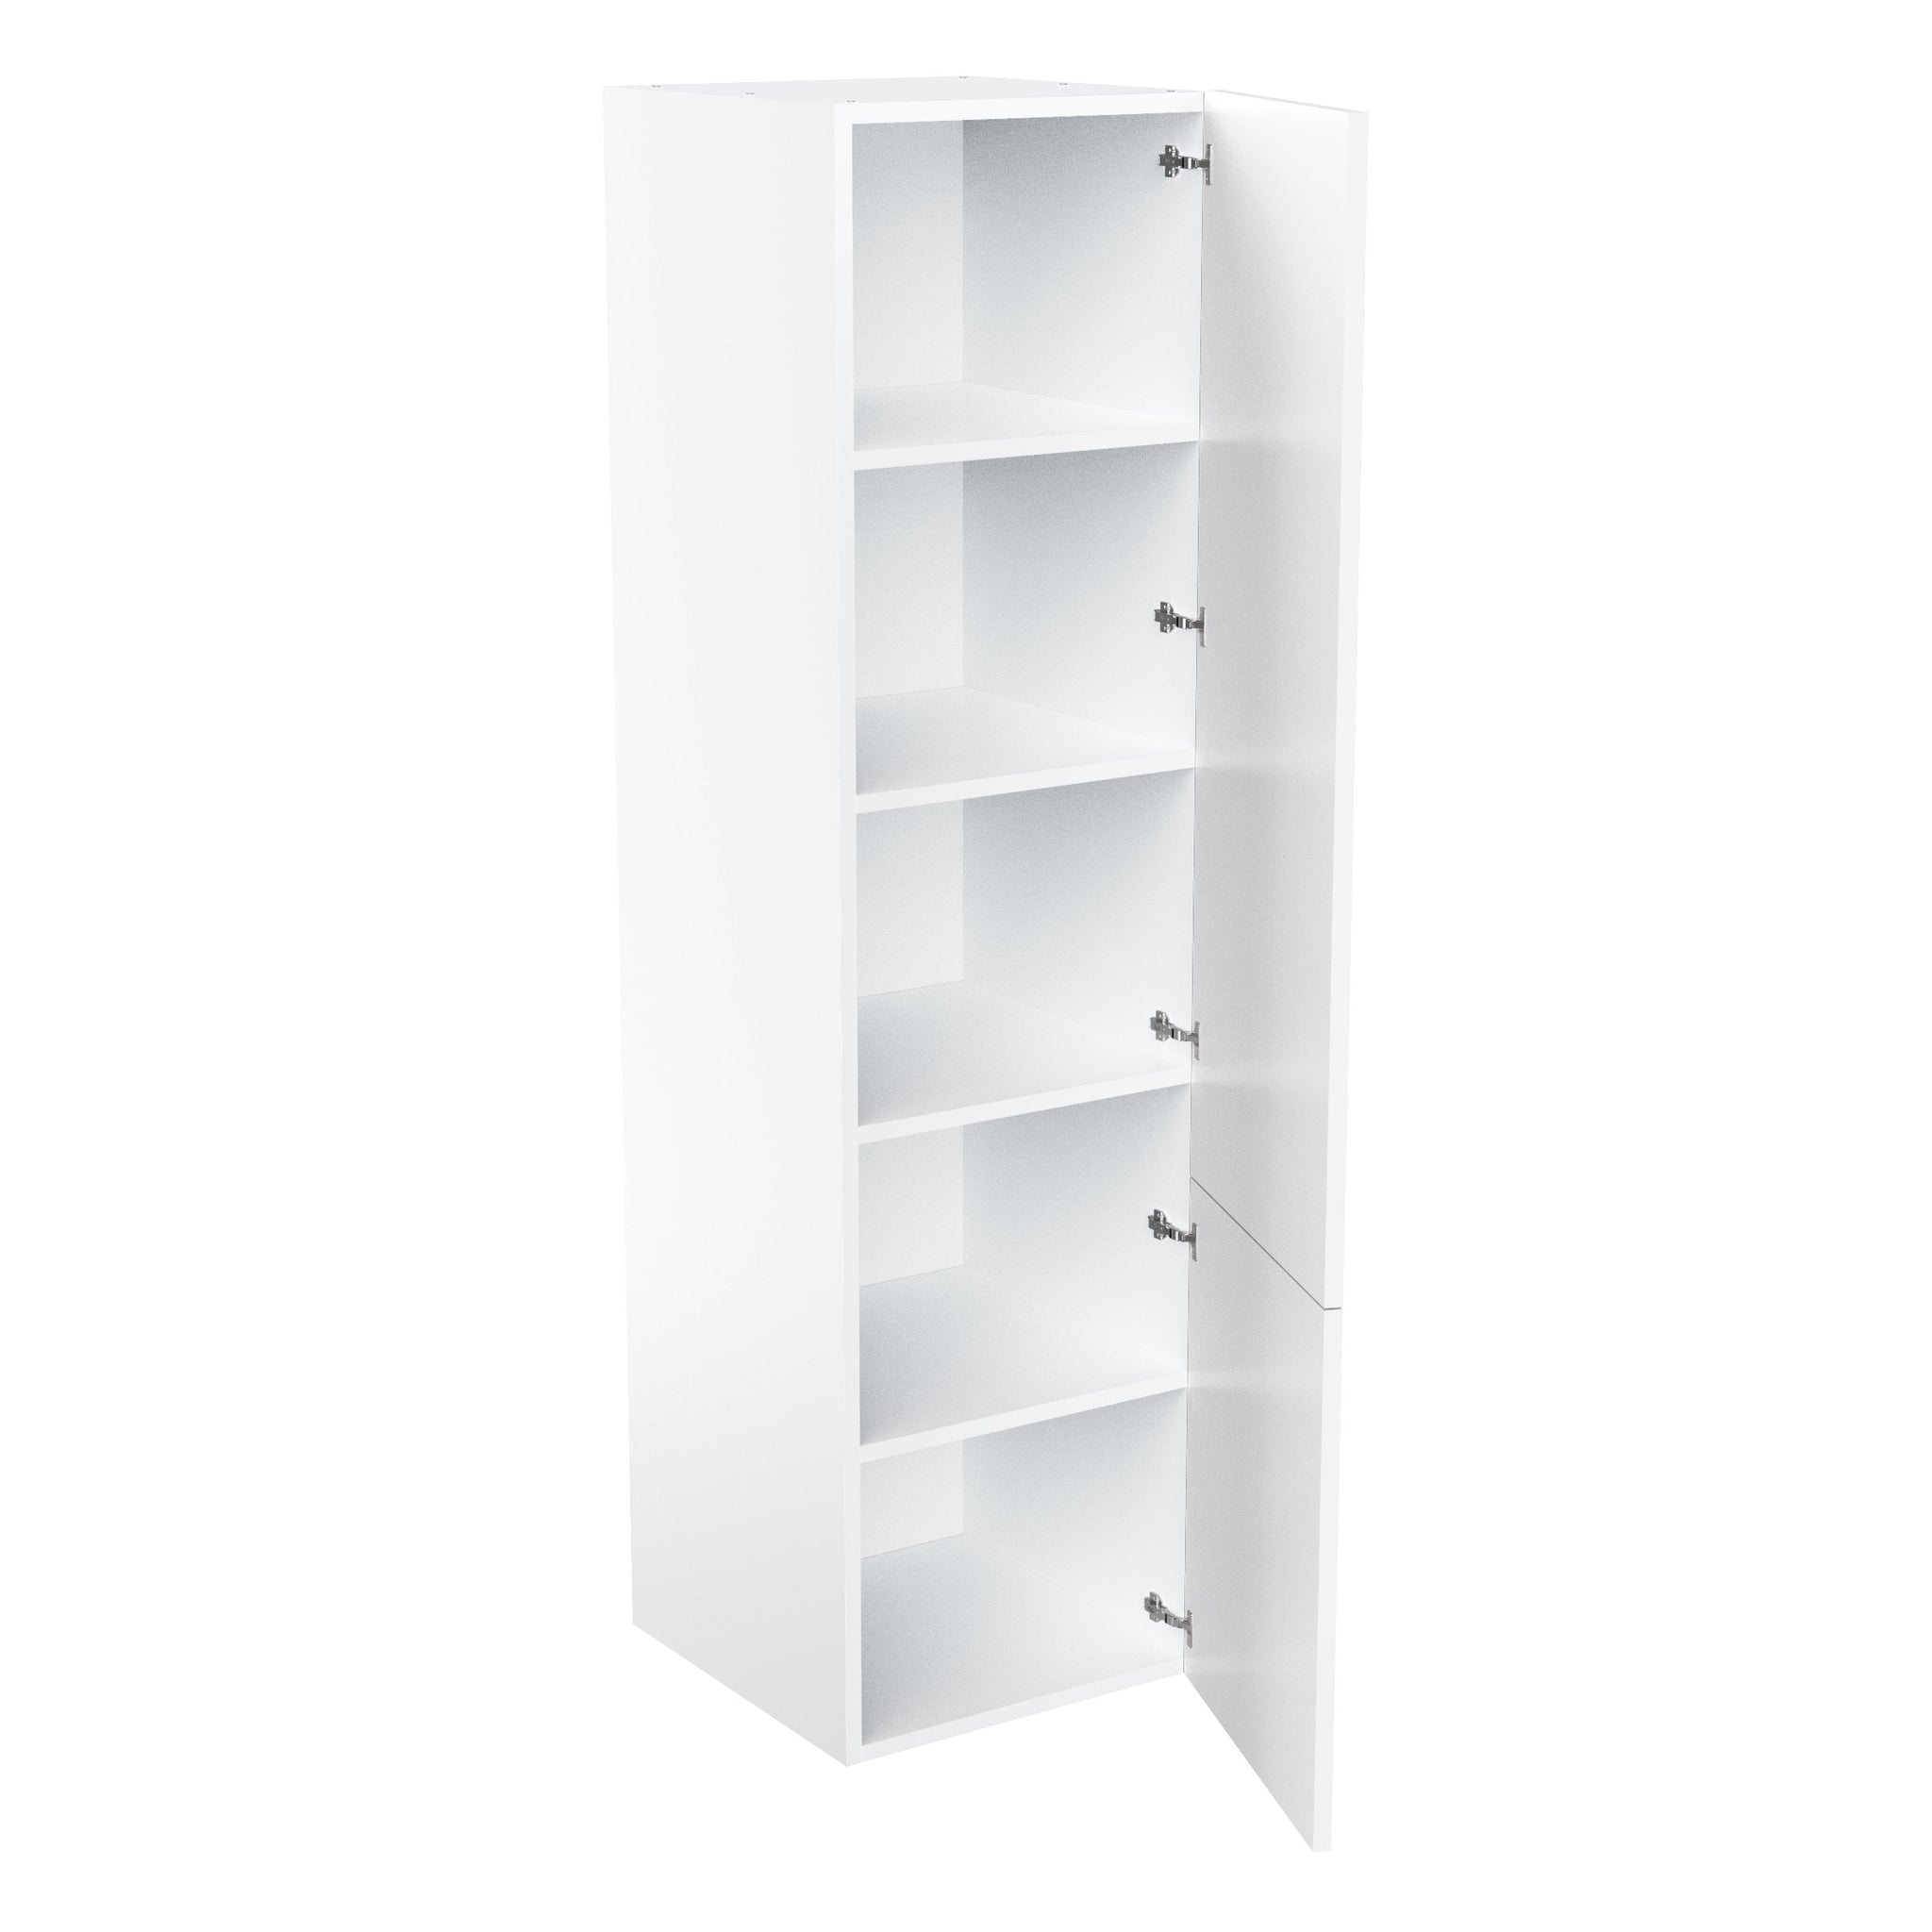 RTA - Glossy White - Single Door Tall Cabinets | 24"W x 90"H x 23.8"D